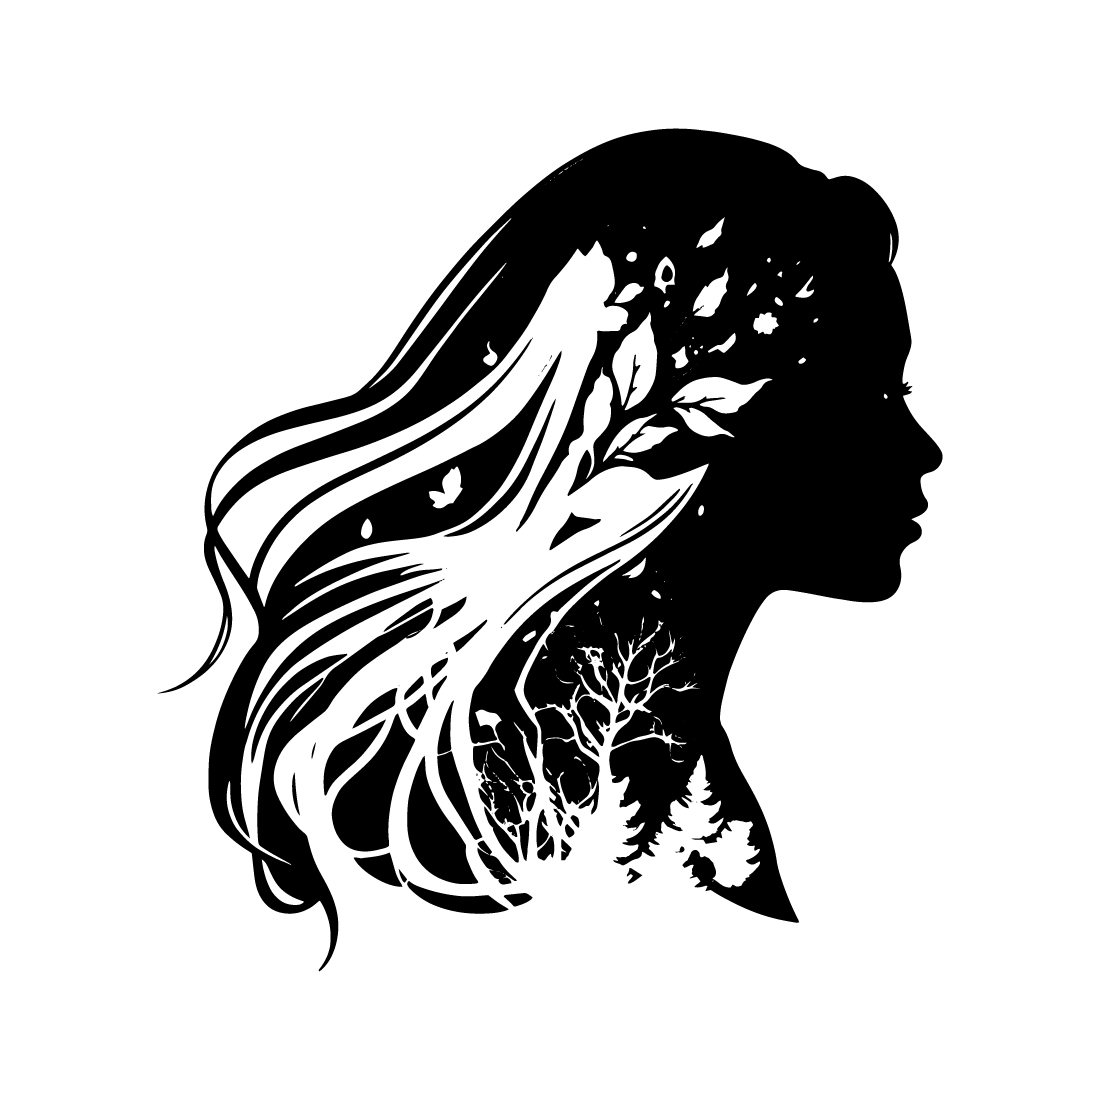 Silhouette of a woman with long hair.